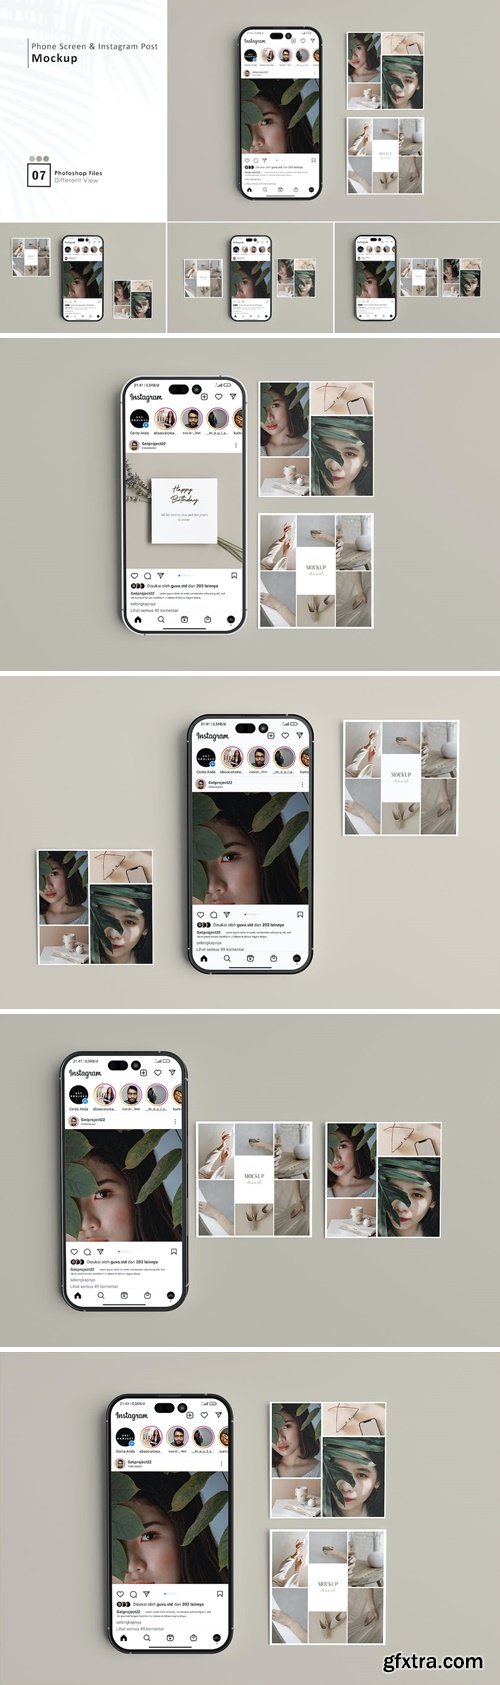 Phone Screen With Instagram Post Mockup HTJPZ5V